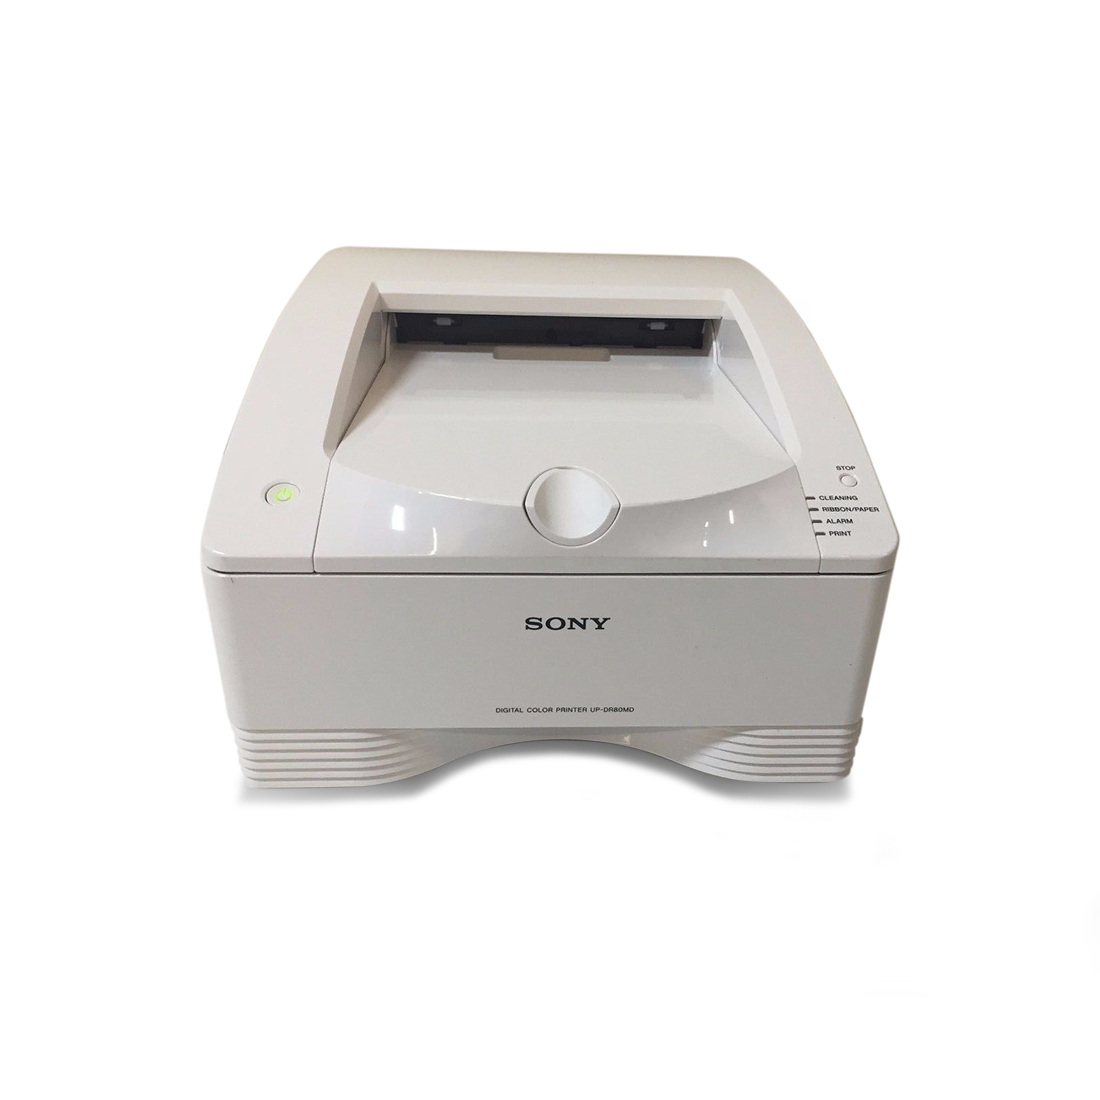 Sony UP-DR80MD Color Video Printer